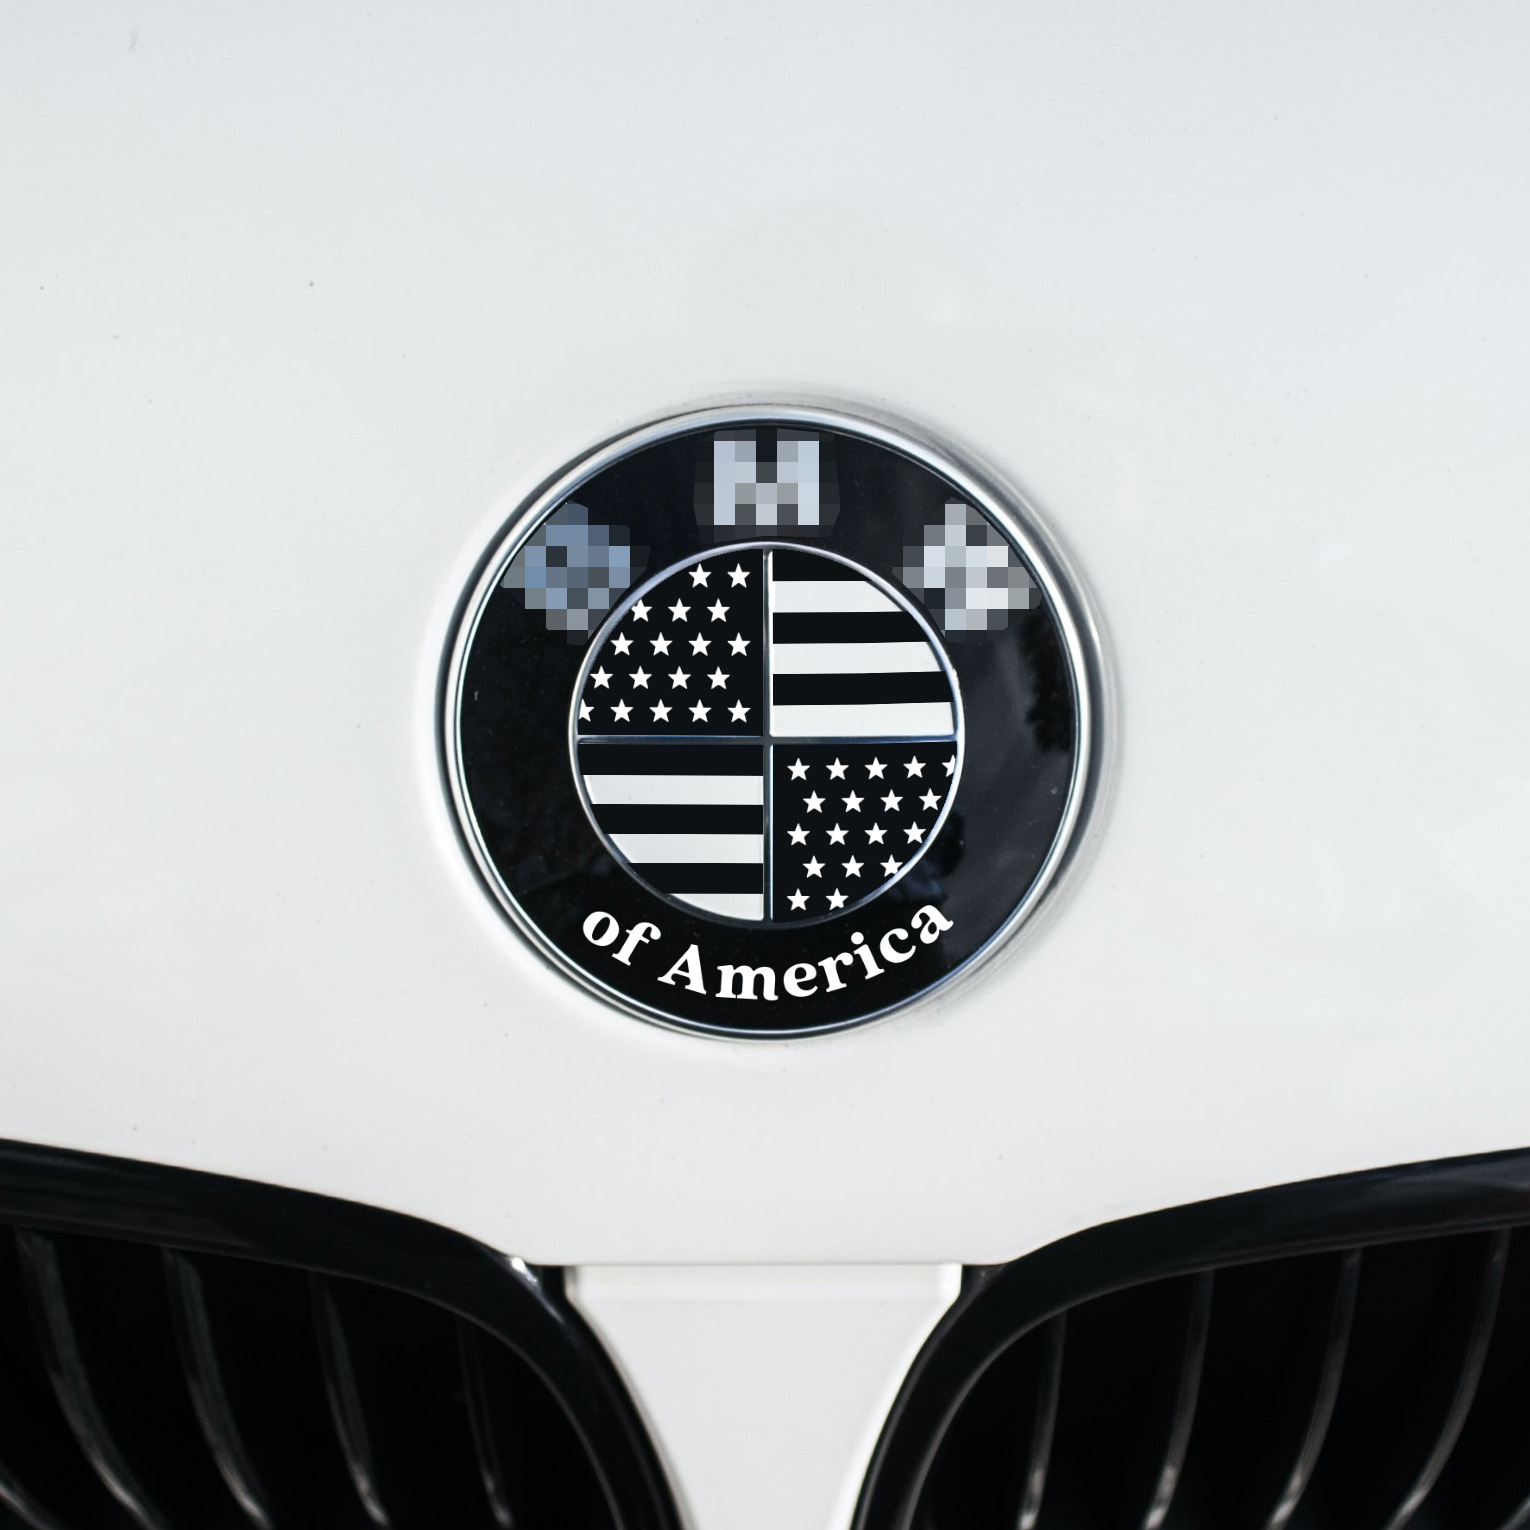 Overlay sticker that adds american flag over your BMW roundel emblem. Sticker features BMW of America lettering on the bottom. We only sell the sticker not the emblem.